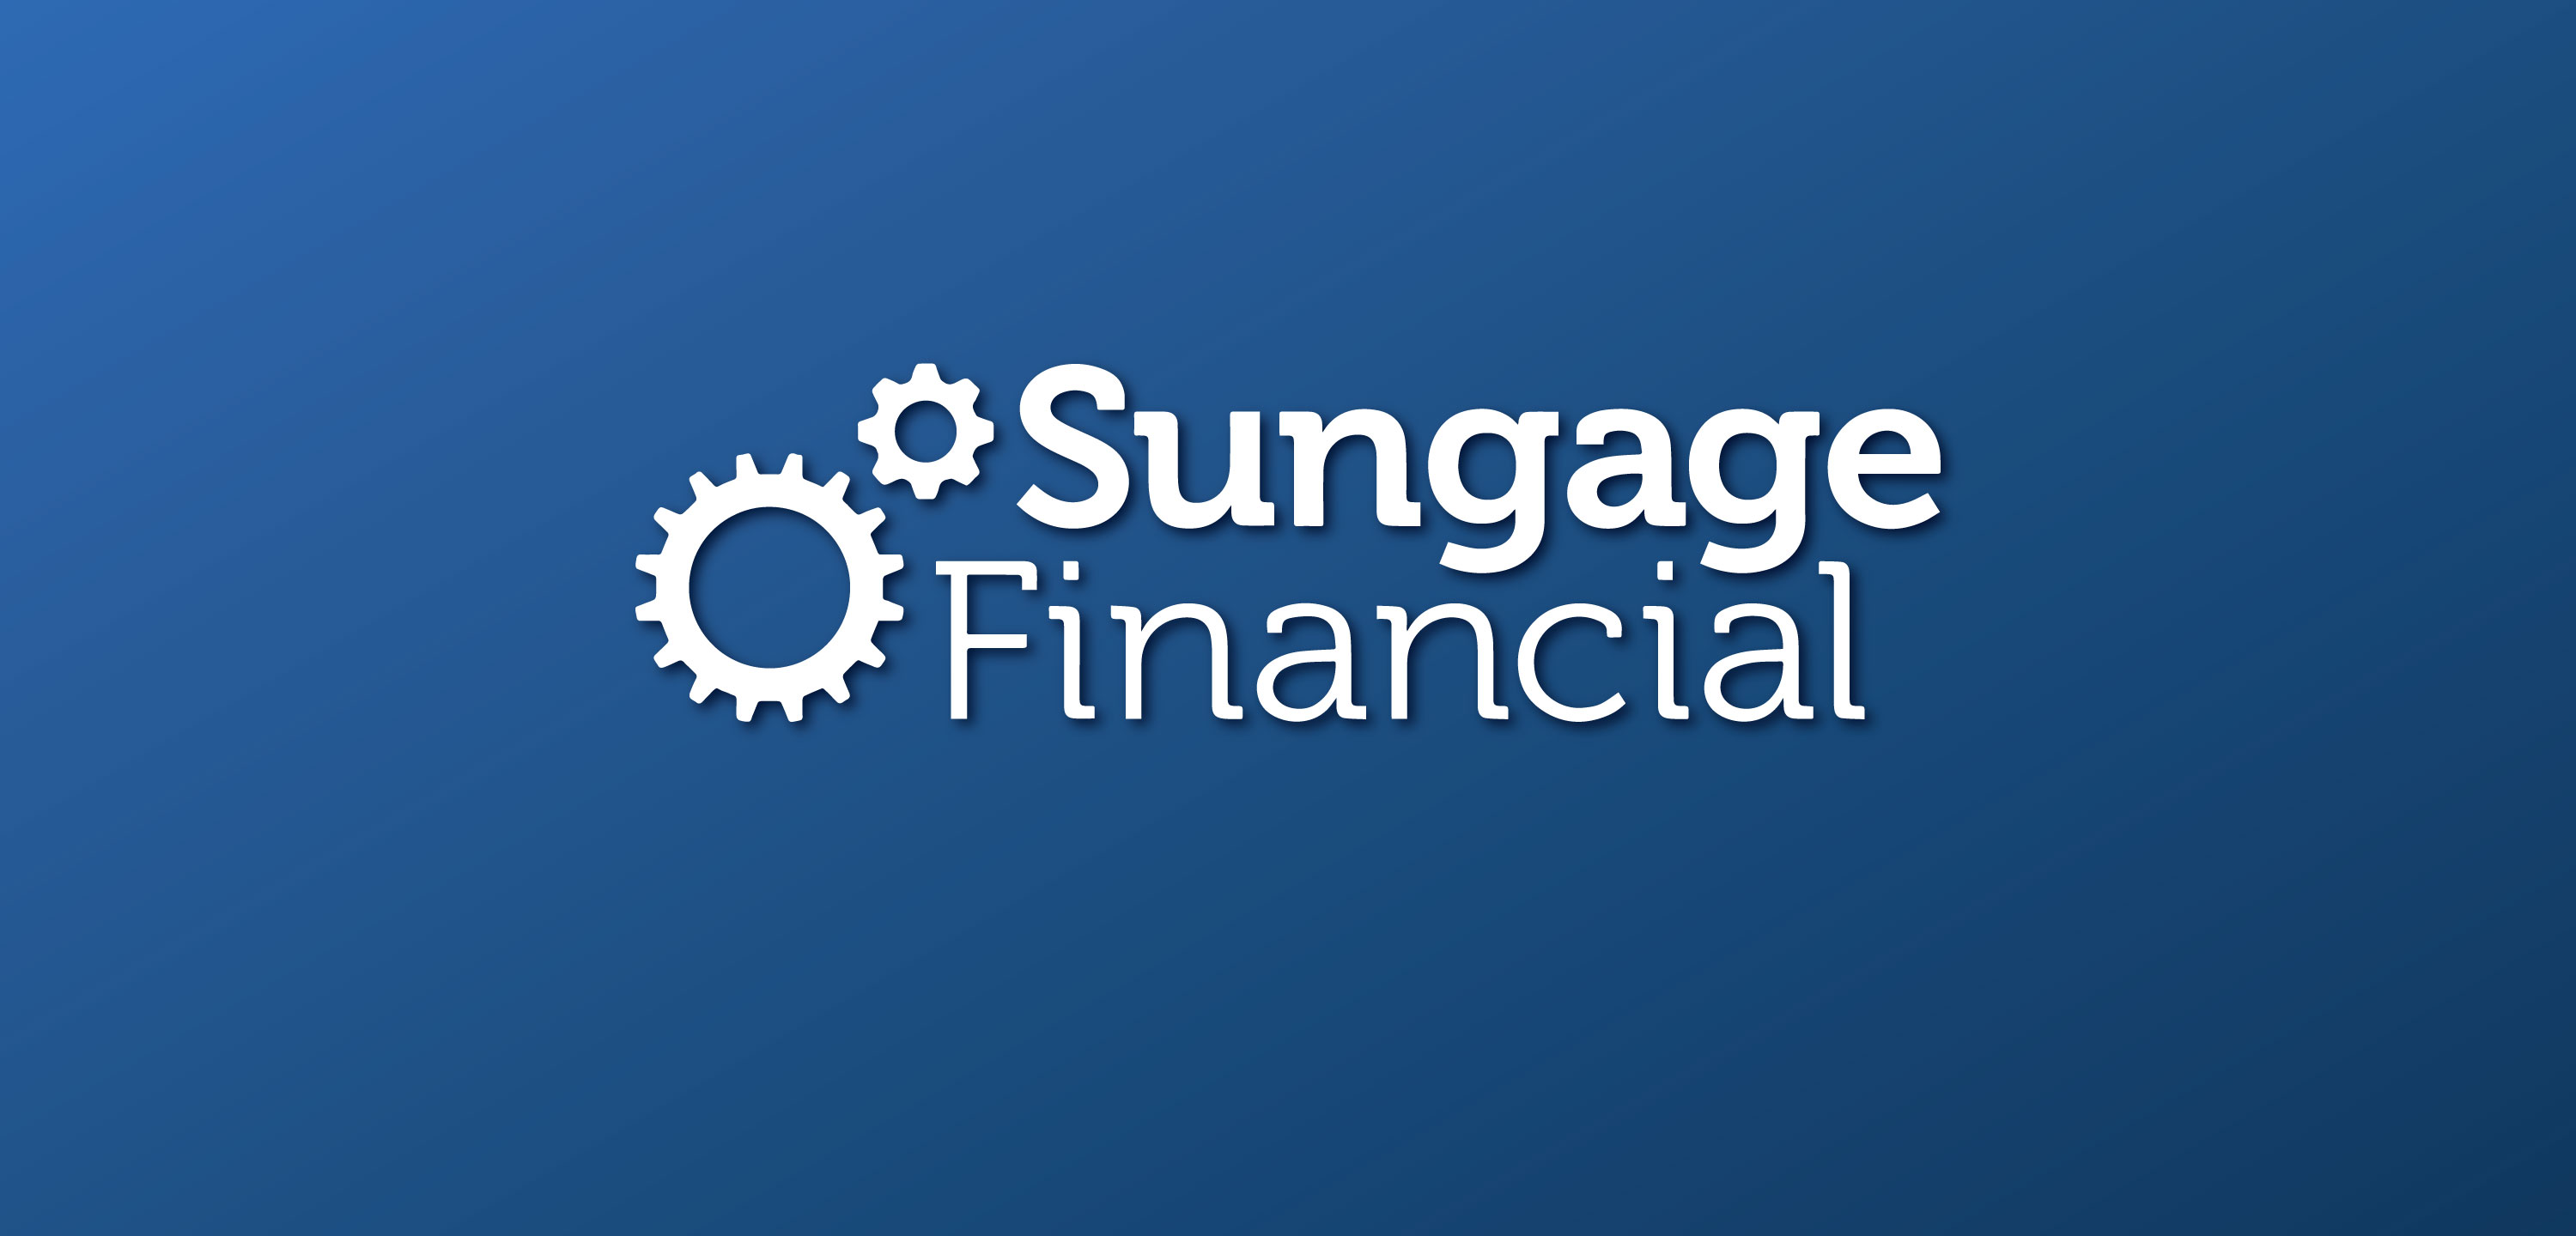 Should you finance solar with Sungage Financial solar loans?